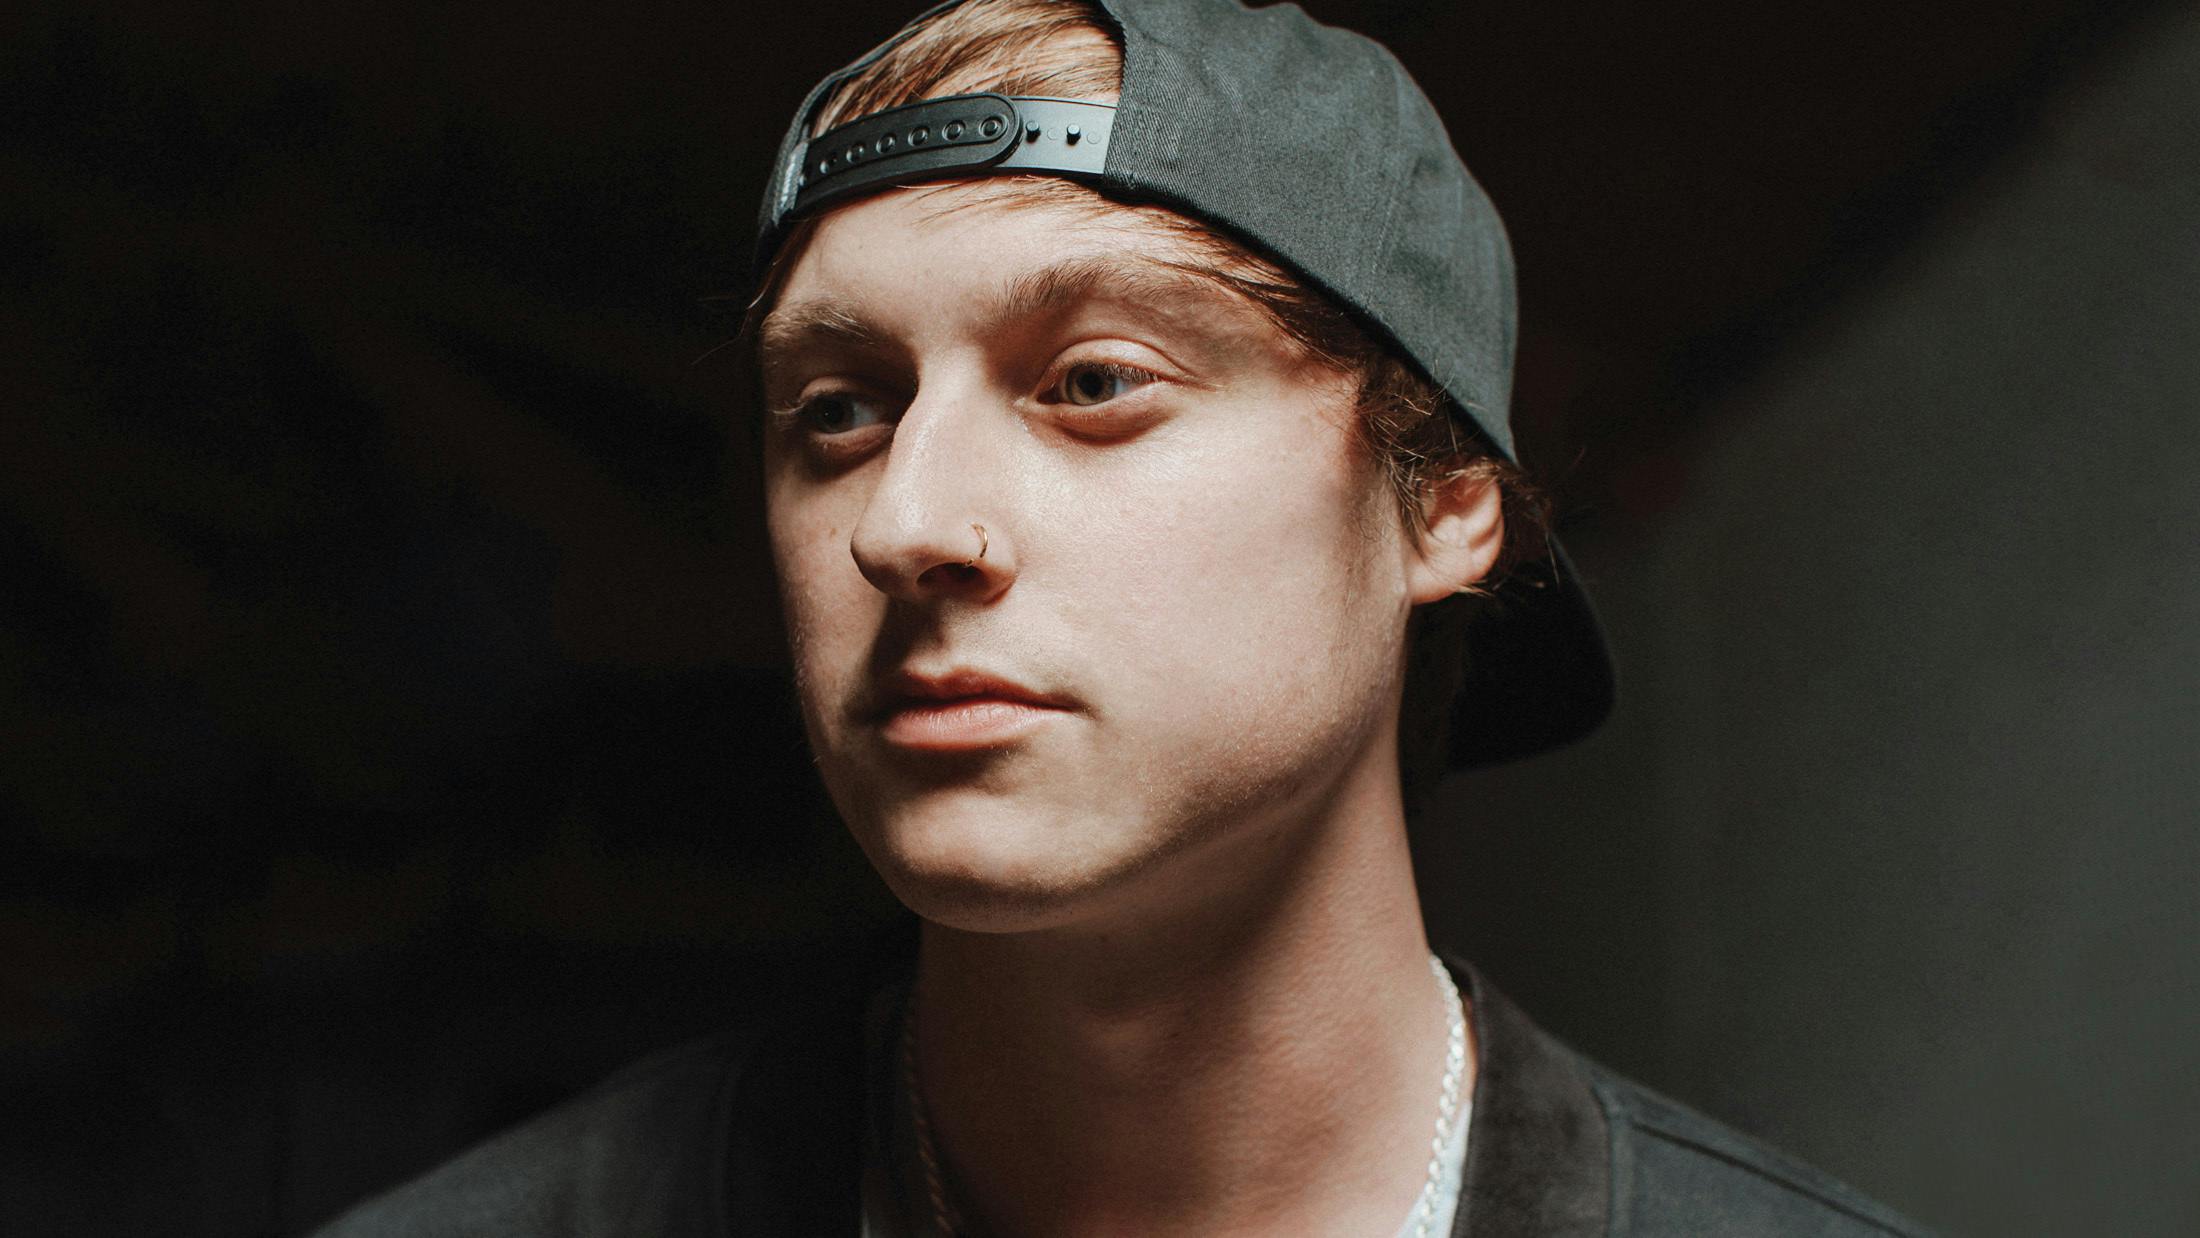 State Champs’ Derek DiScanio: The 10 songs that changed my life